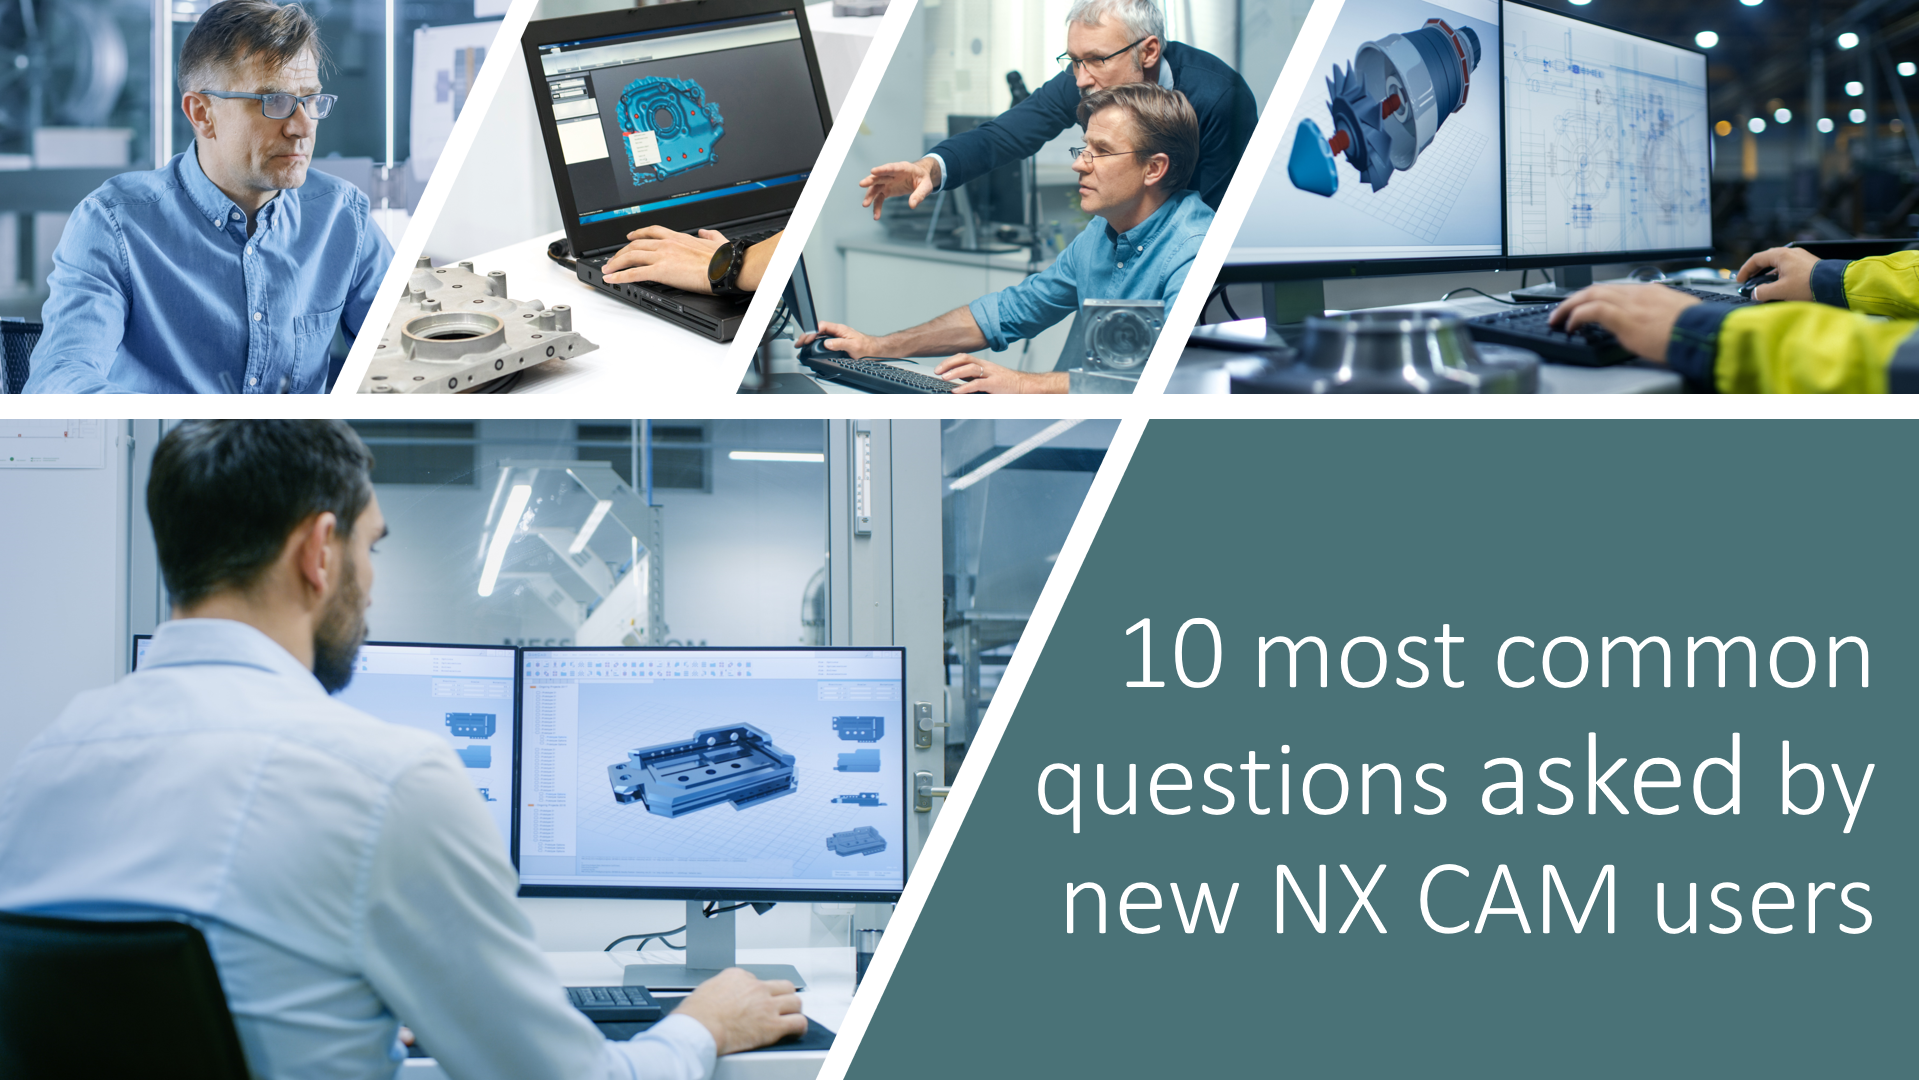 10 top questions asked by new NX CAM users